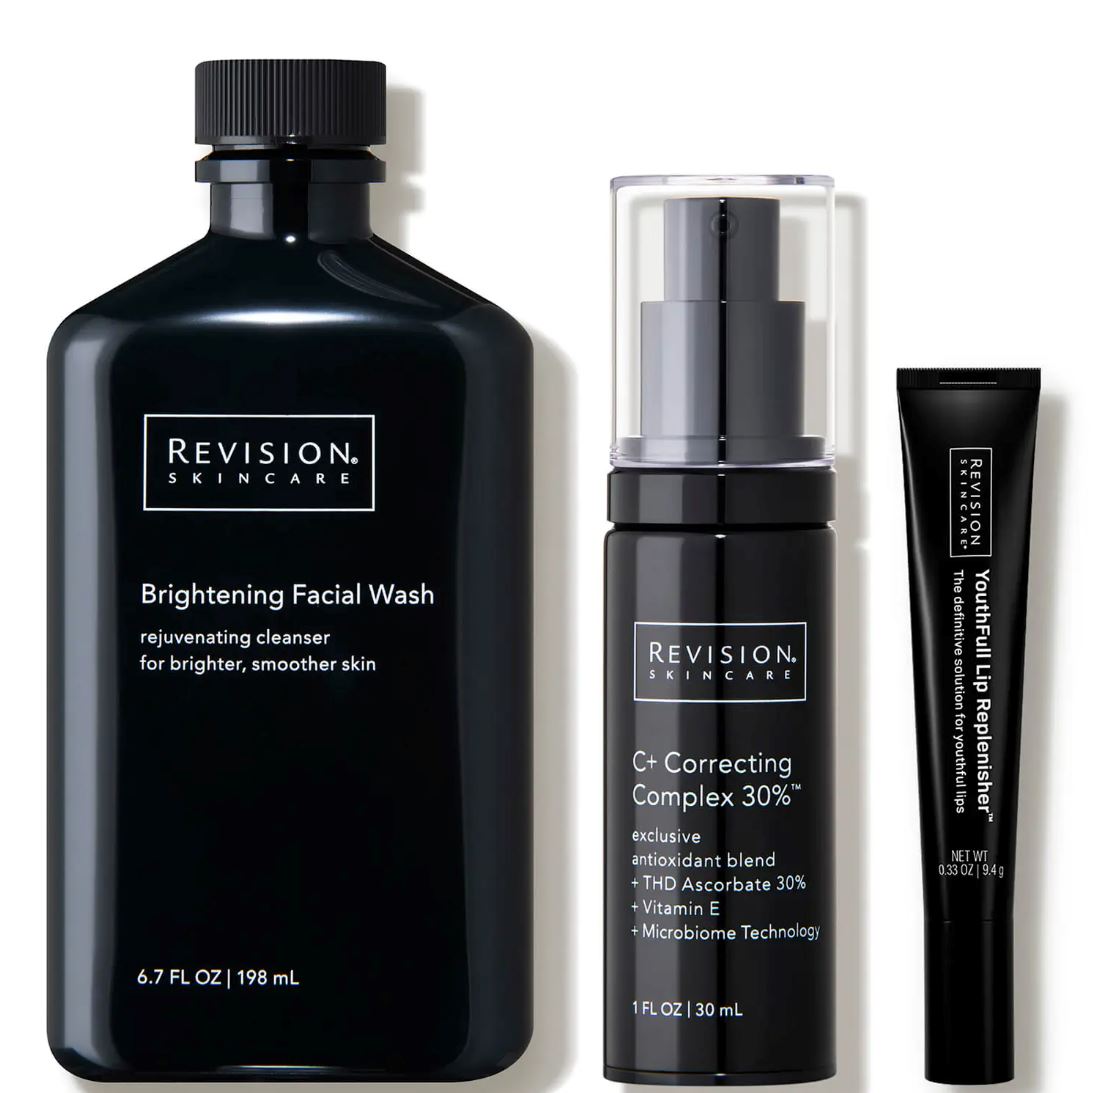 Revision Skincare Daily Essentials Kit ($238 Value) Revision Shop at Exclusive Beauty Club